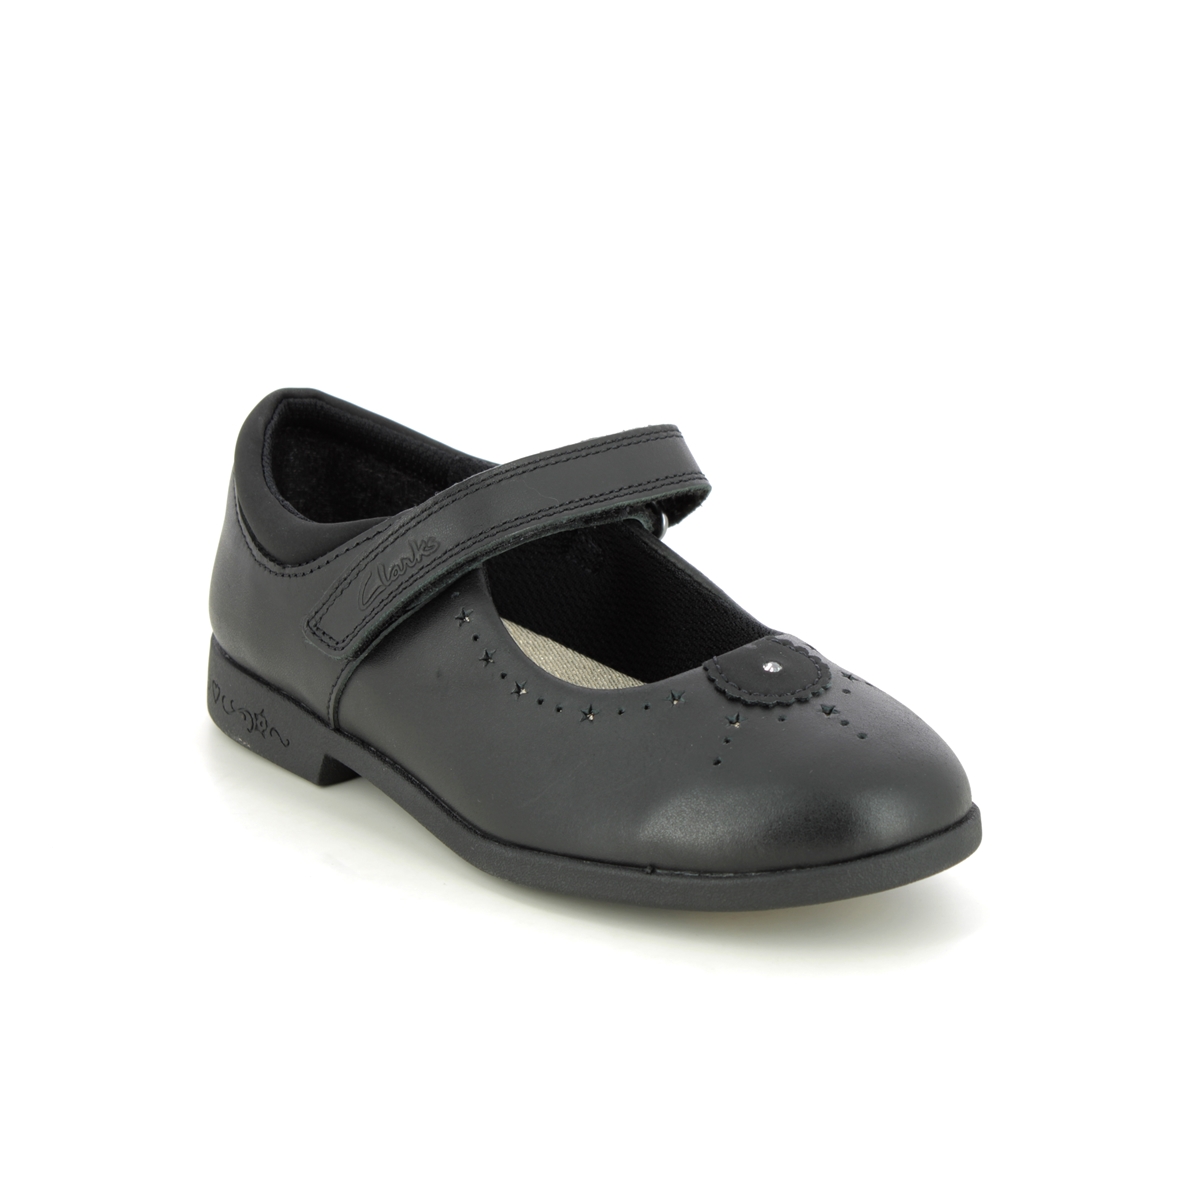 Clarks Magic Step Mj K Black leather Kids girls school shoes 6970-87G in a Plain Leather in Size 10